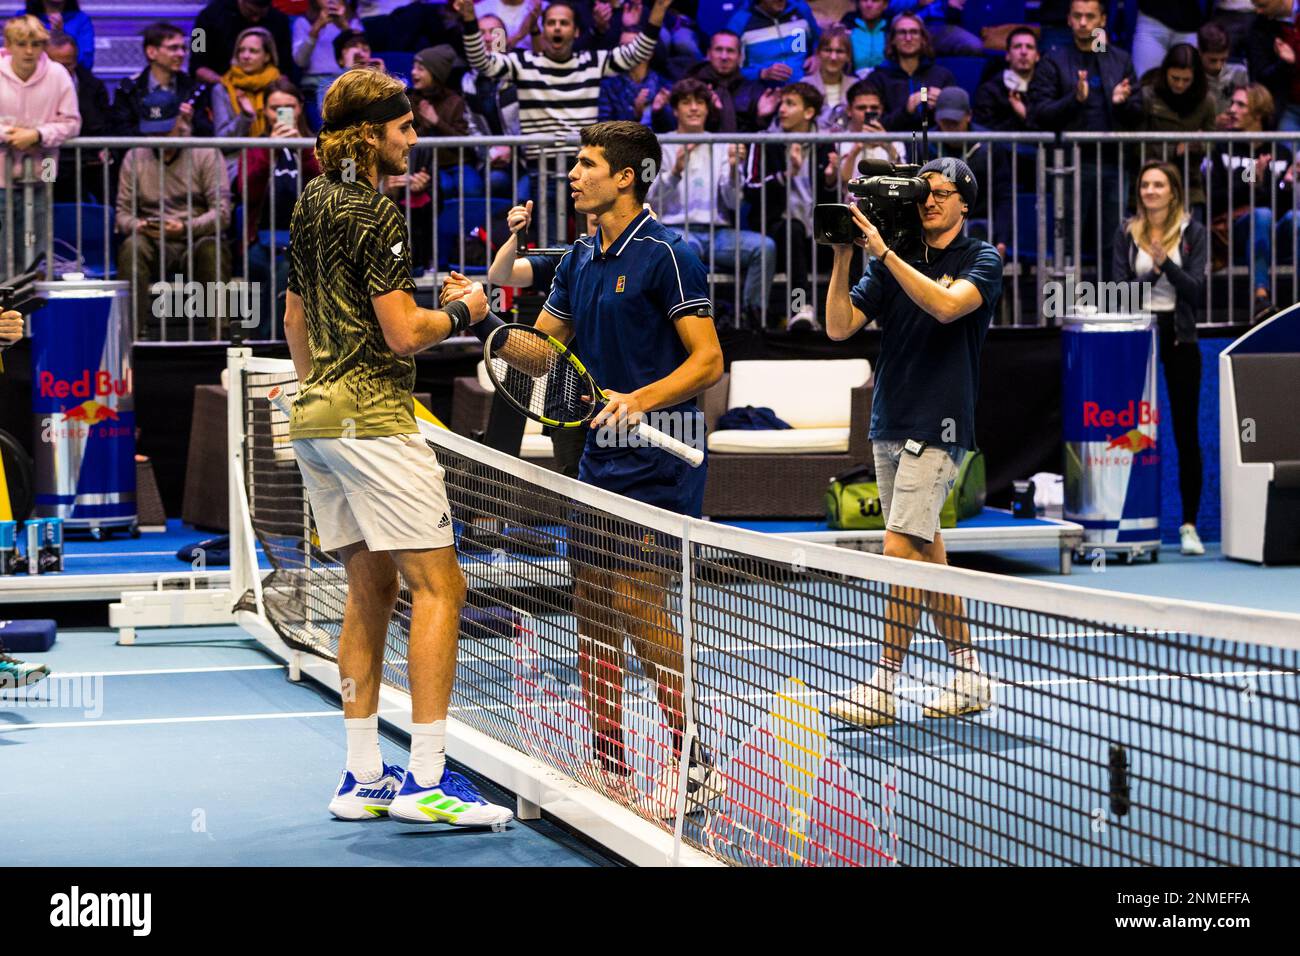 Stefanos Tsitsipas new tennis event brainchild Red Bull Bassline saw young Spanish sensation Carlos Alcaraz edge out the Greek superstar in the Vienna final on Friday night as the exciting tiebreak format